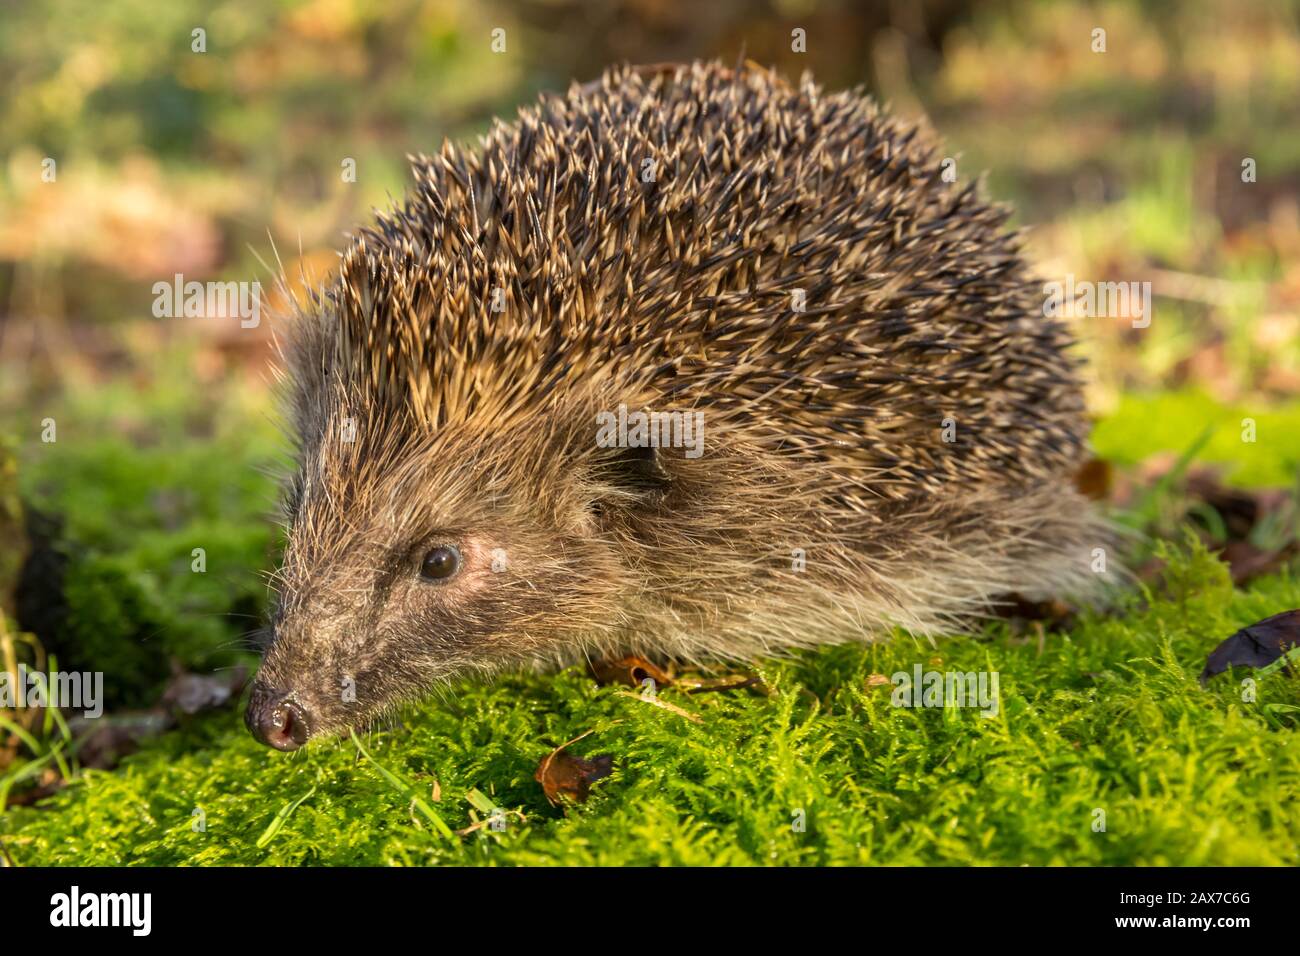 Hedgehog (Latin name: Erinaceus europaeus) Close up of a wild, native  hedgehog in natural woodland habitat, with green moss and grass.  Blurred backg Stock Photo